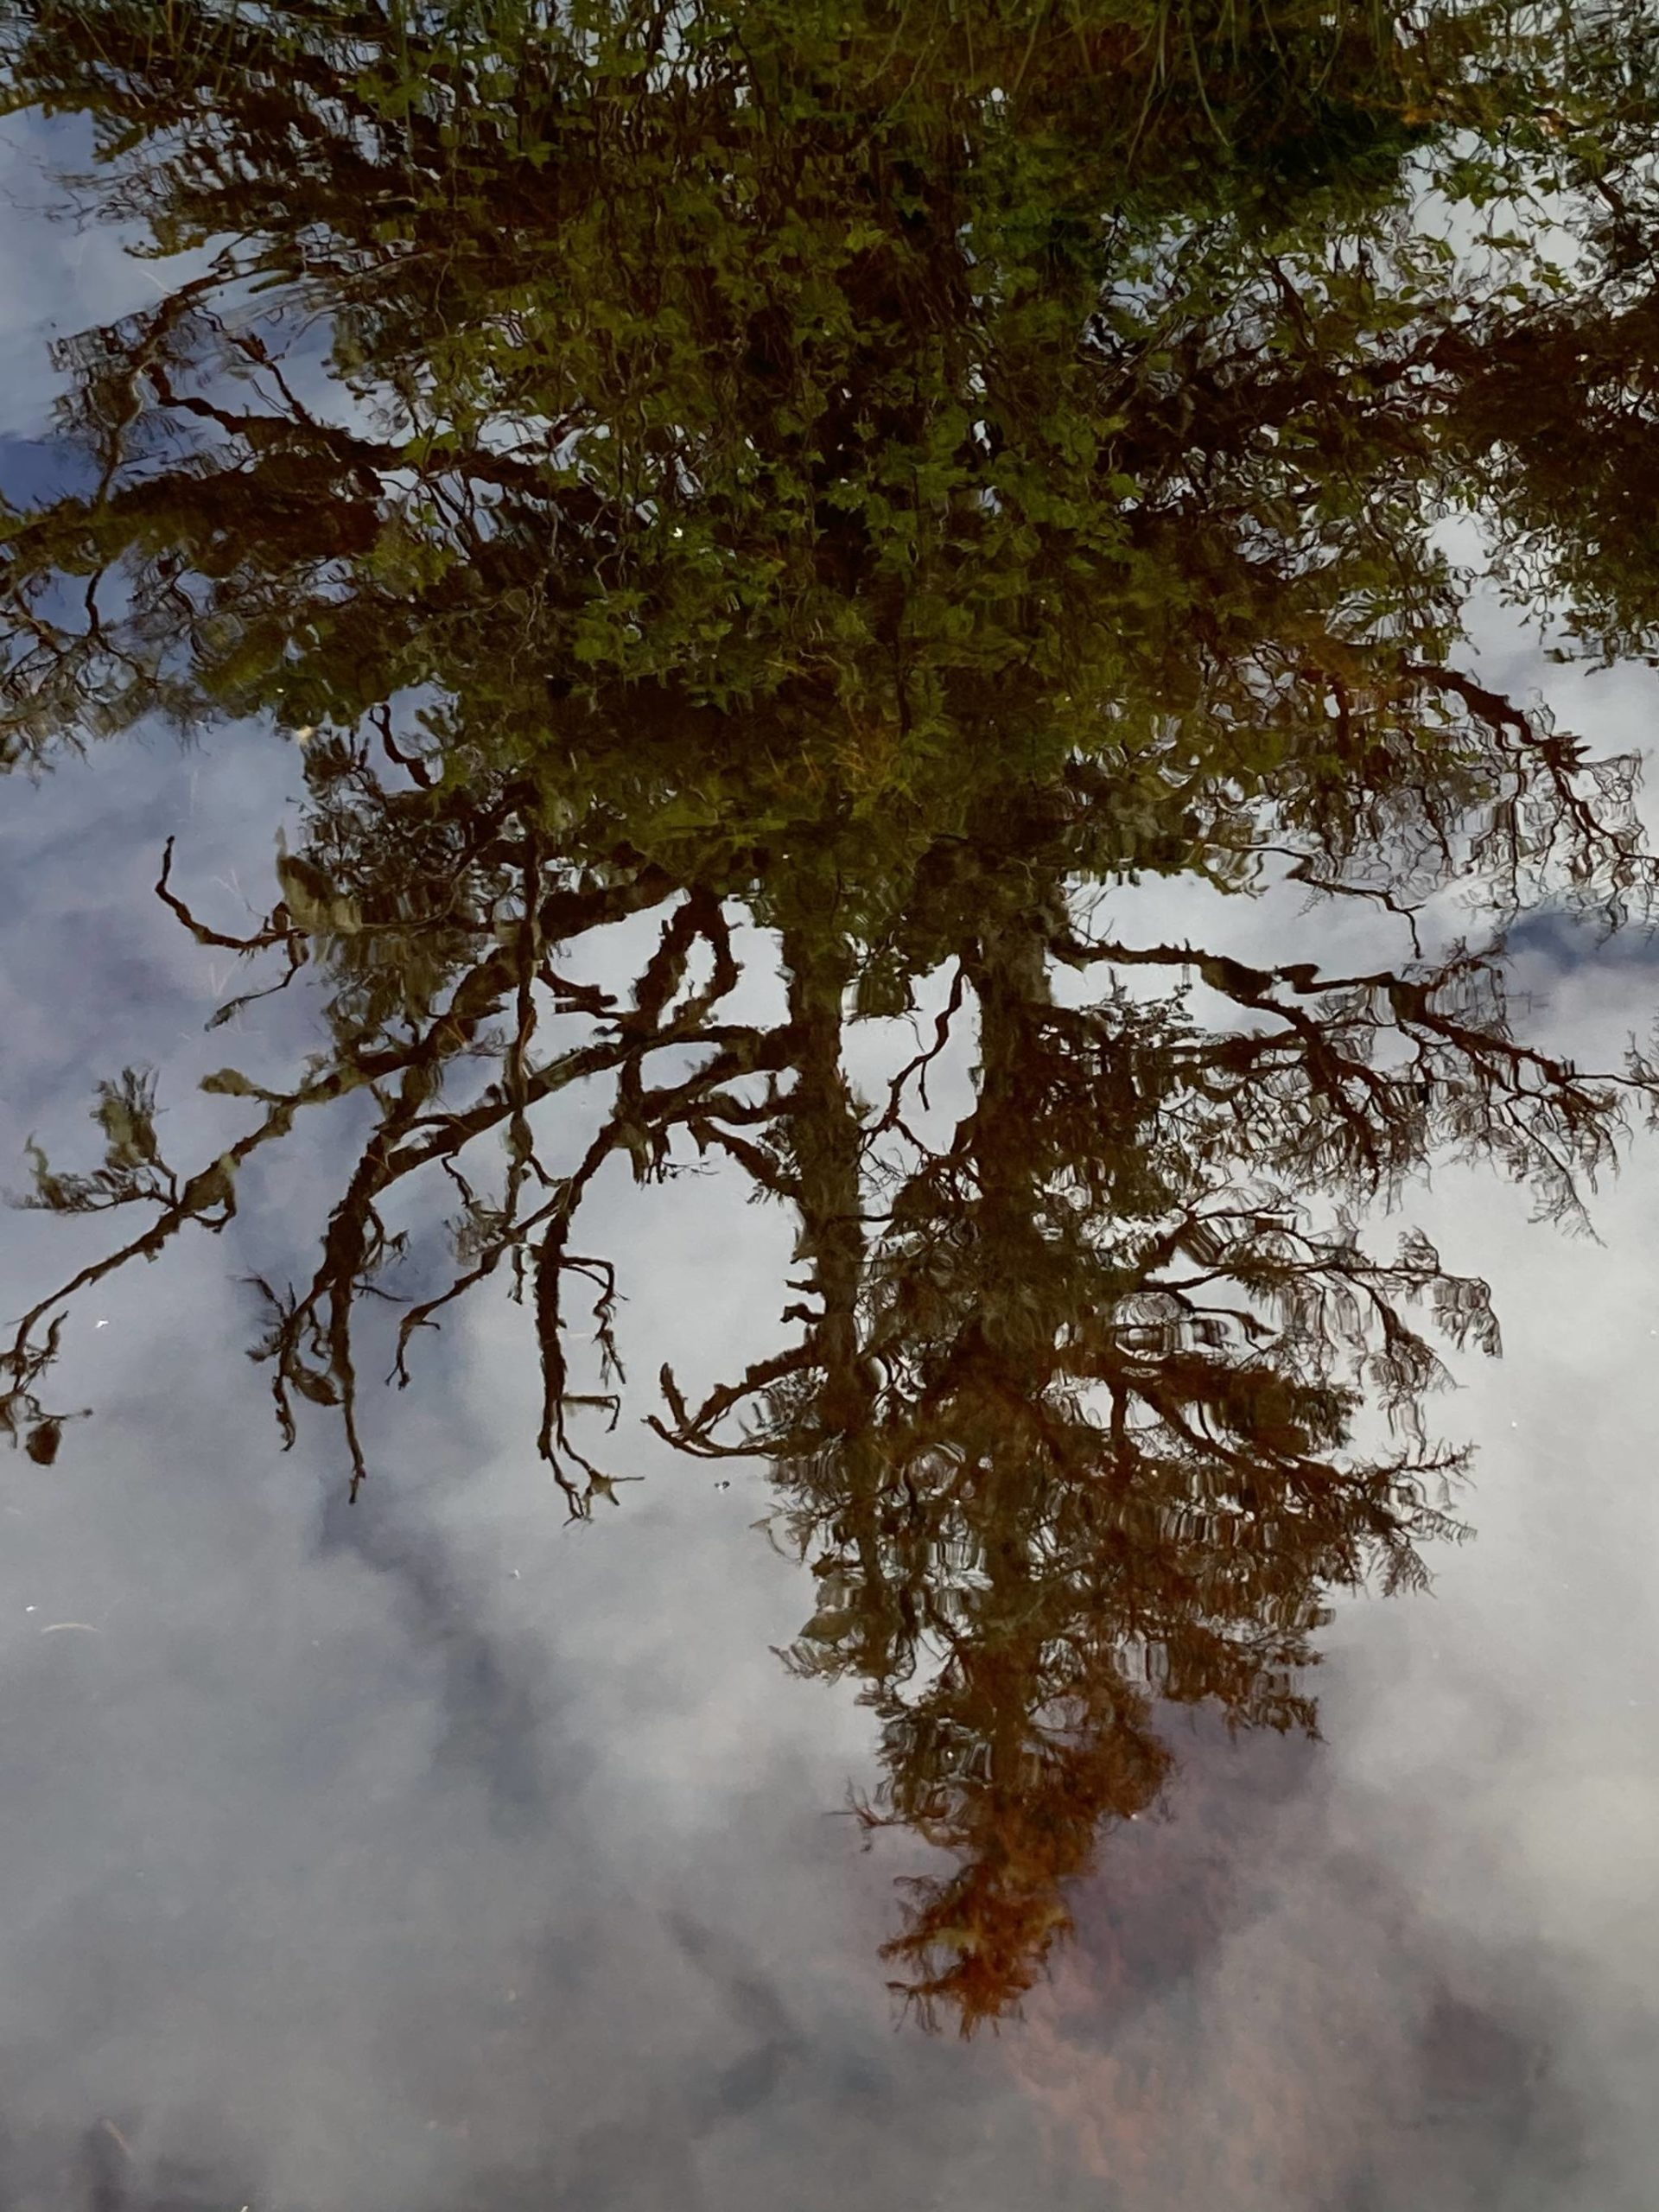 Reflections in a muskeg pond in Auke Mountain on Aug 19. (Courtesy Photo / Deborah Rudis)